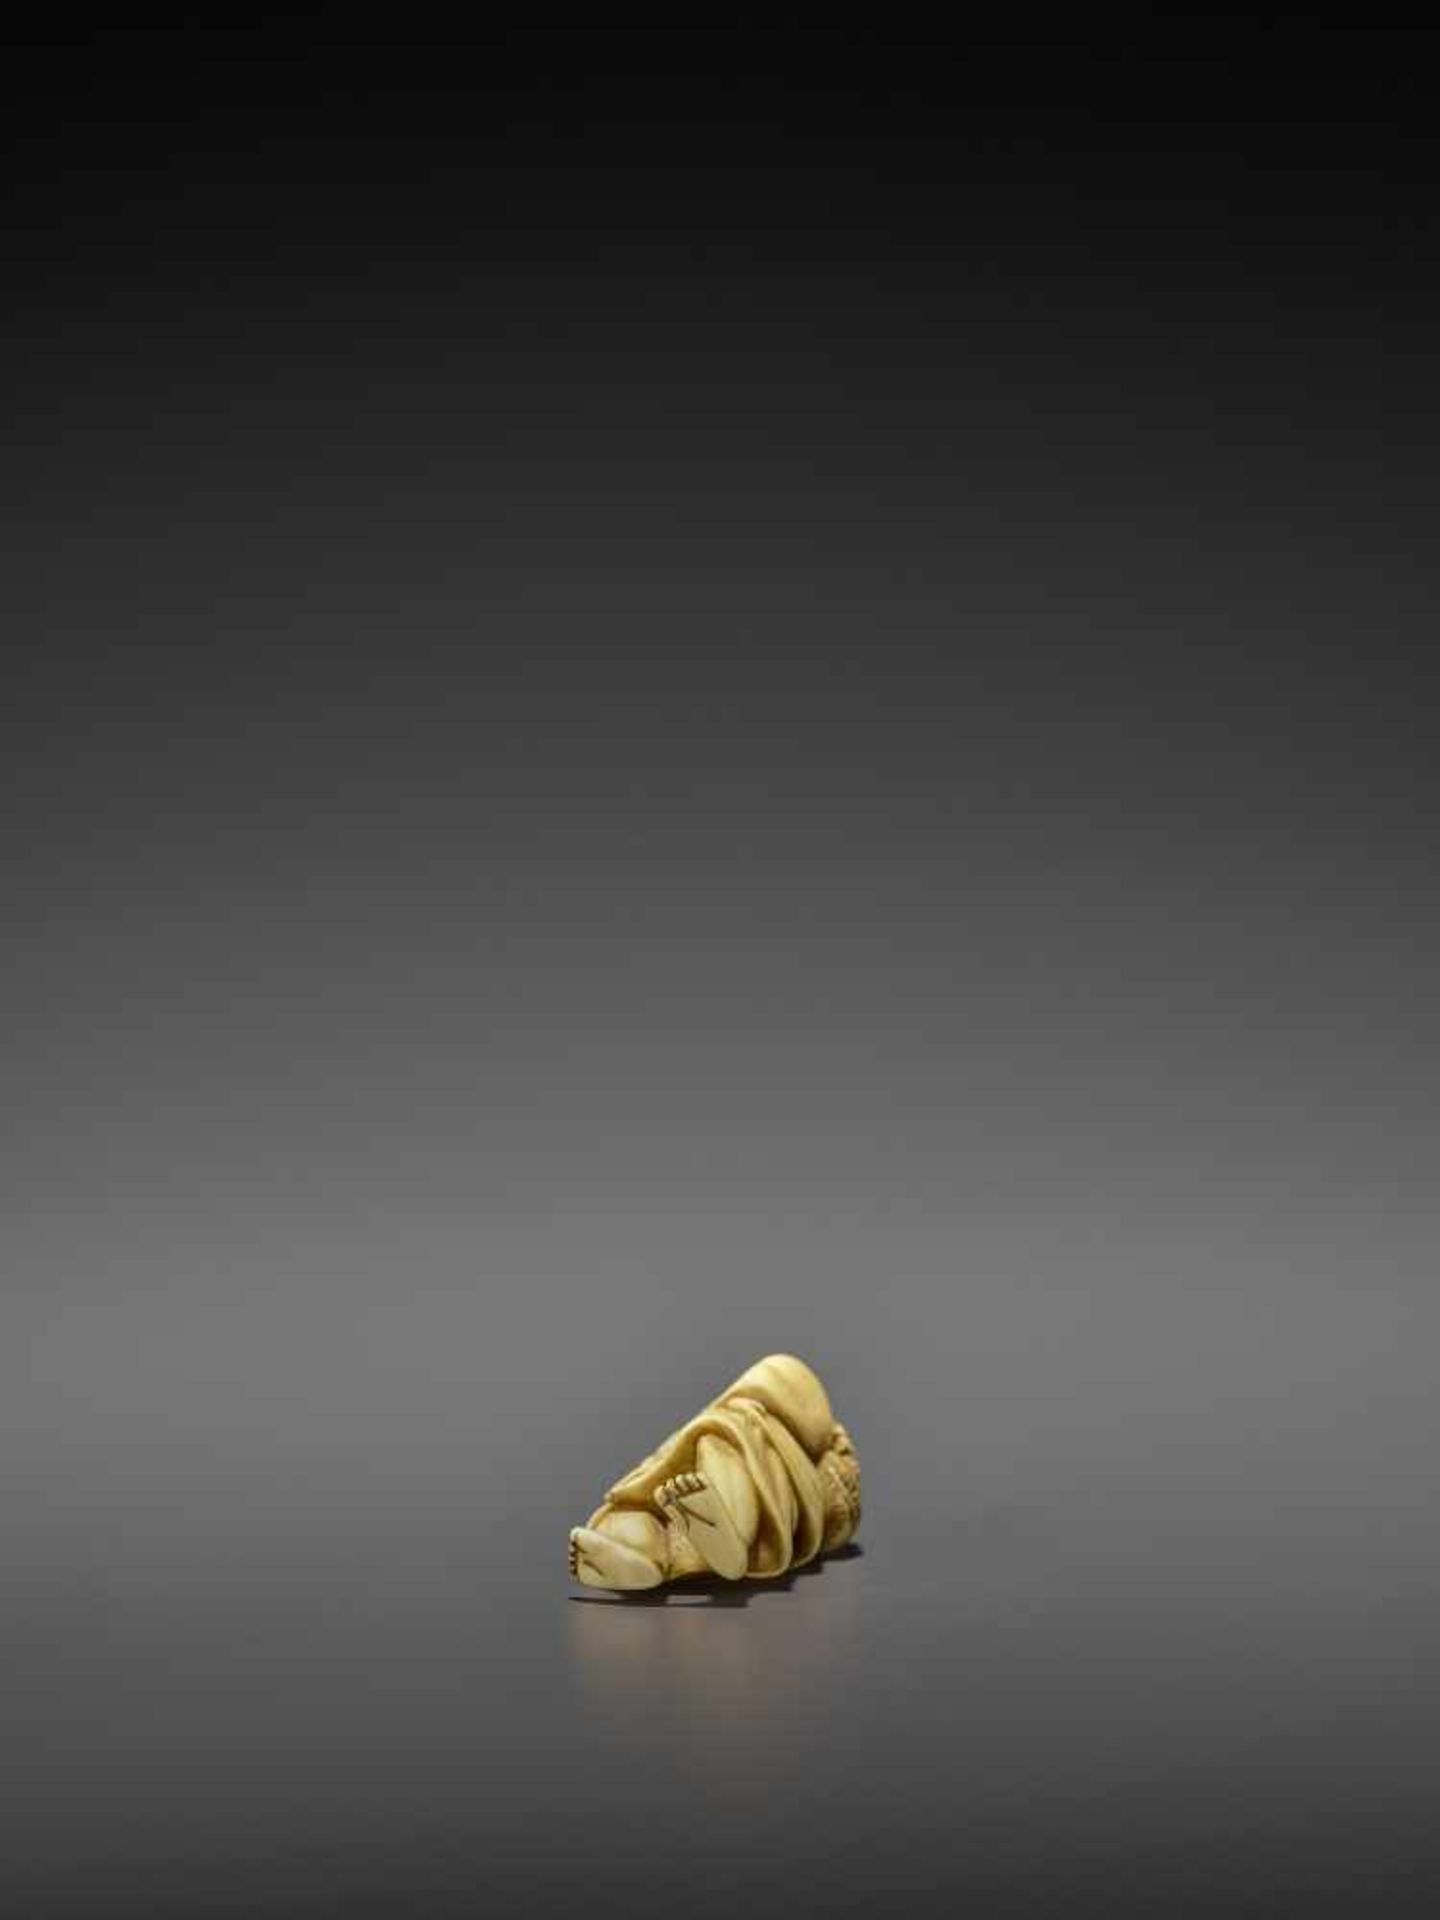 AN IVORY NETSUKE OF A PERSIMMON MERCHANT UnsignedJapan, early 19th century, Edo period (1615-1868) - Image 9 of 10